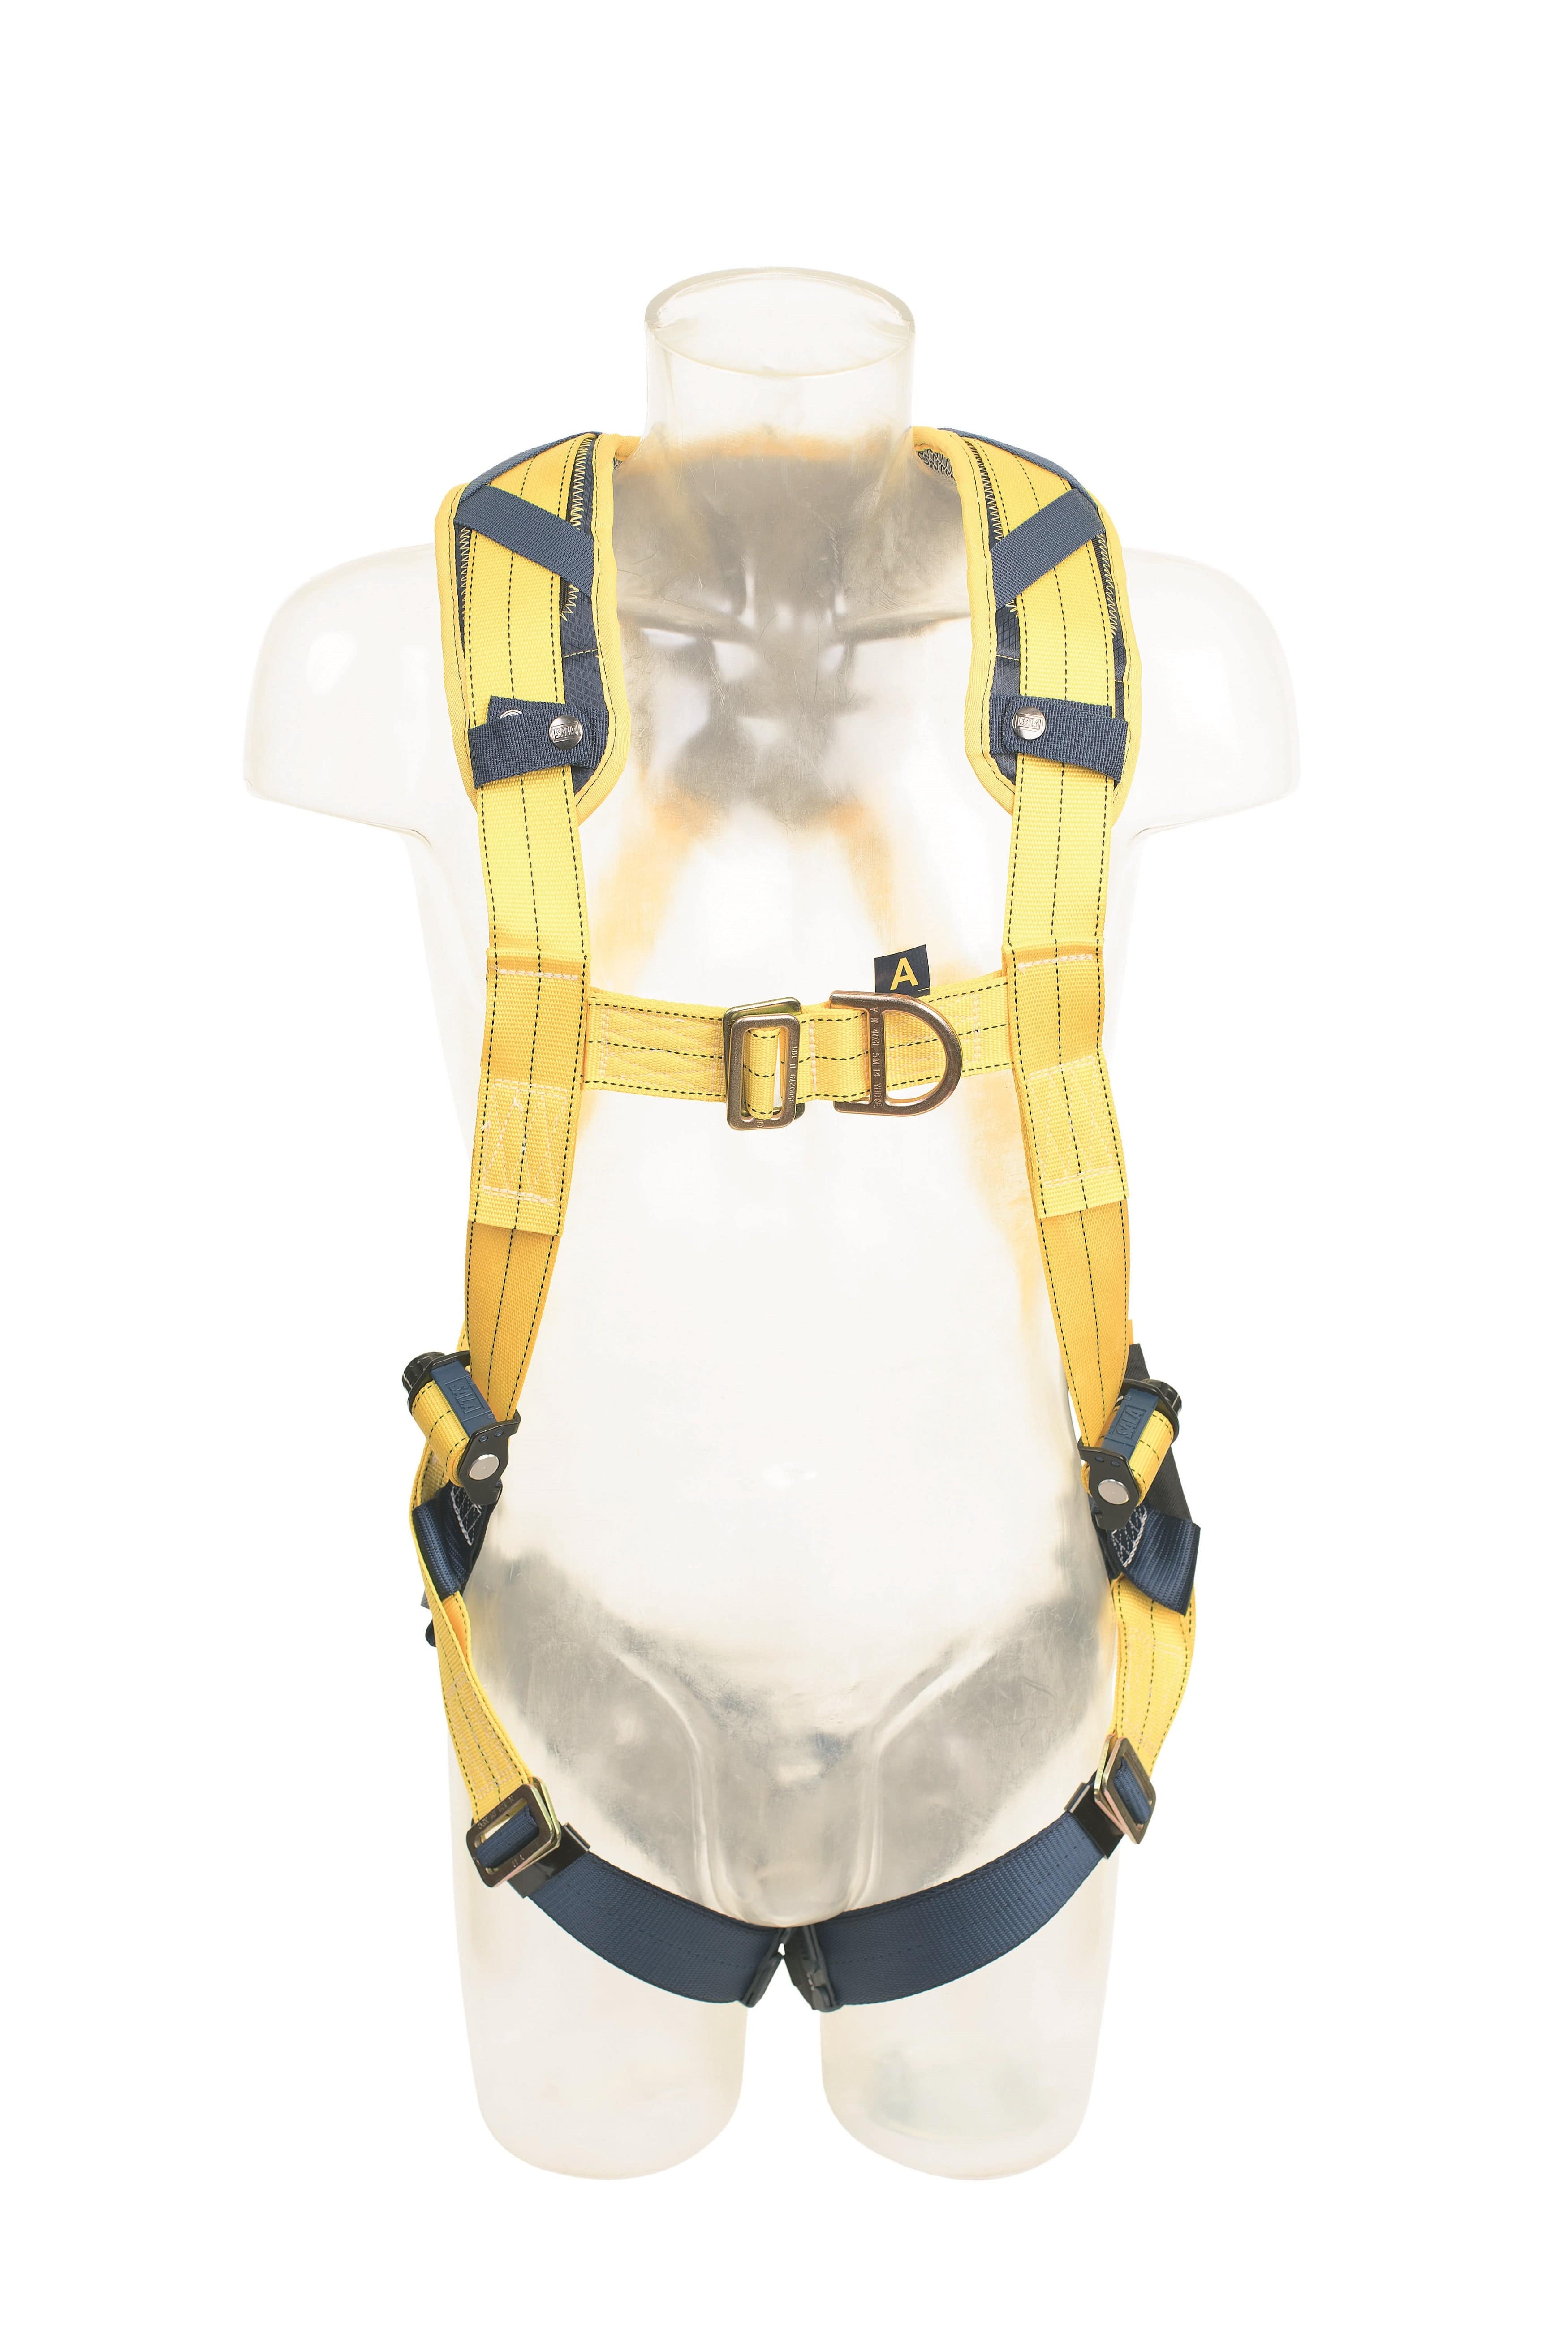 3M DBI SALA Delta Comfort Harness with Front & Rear Attachment Points and Pass Through Buckles - SecureHeights